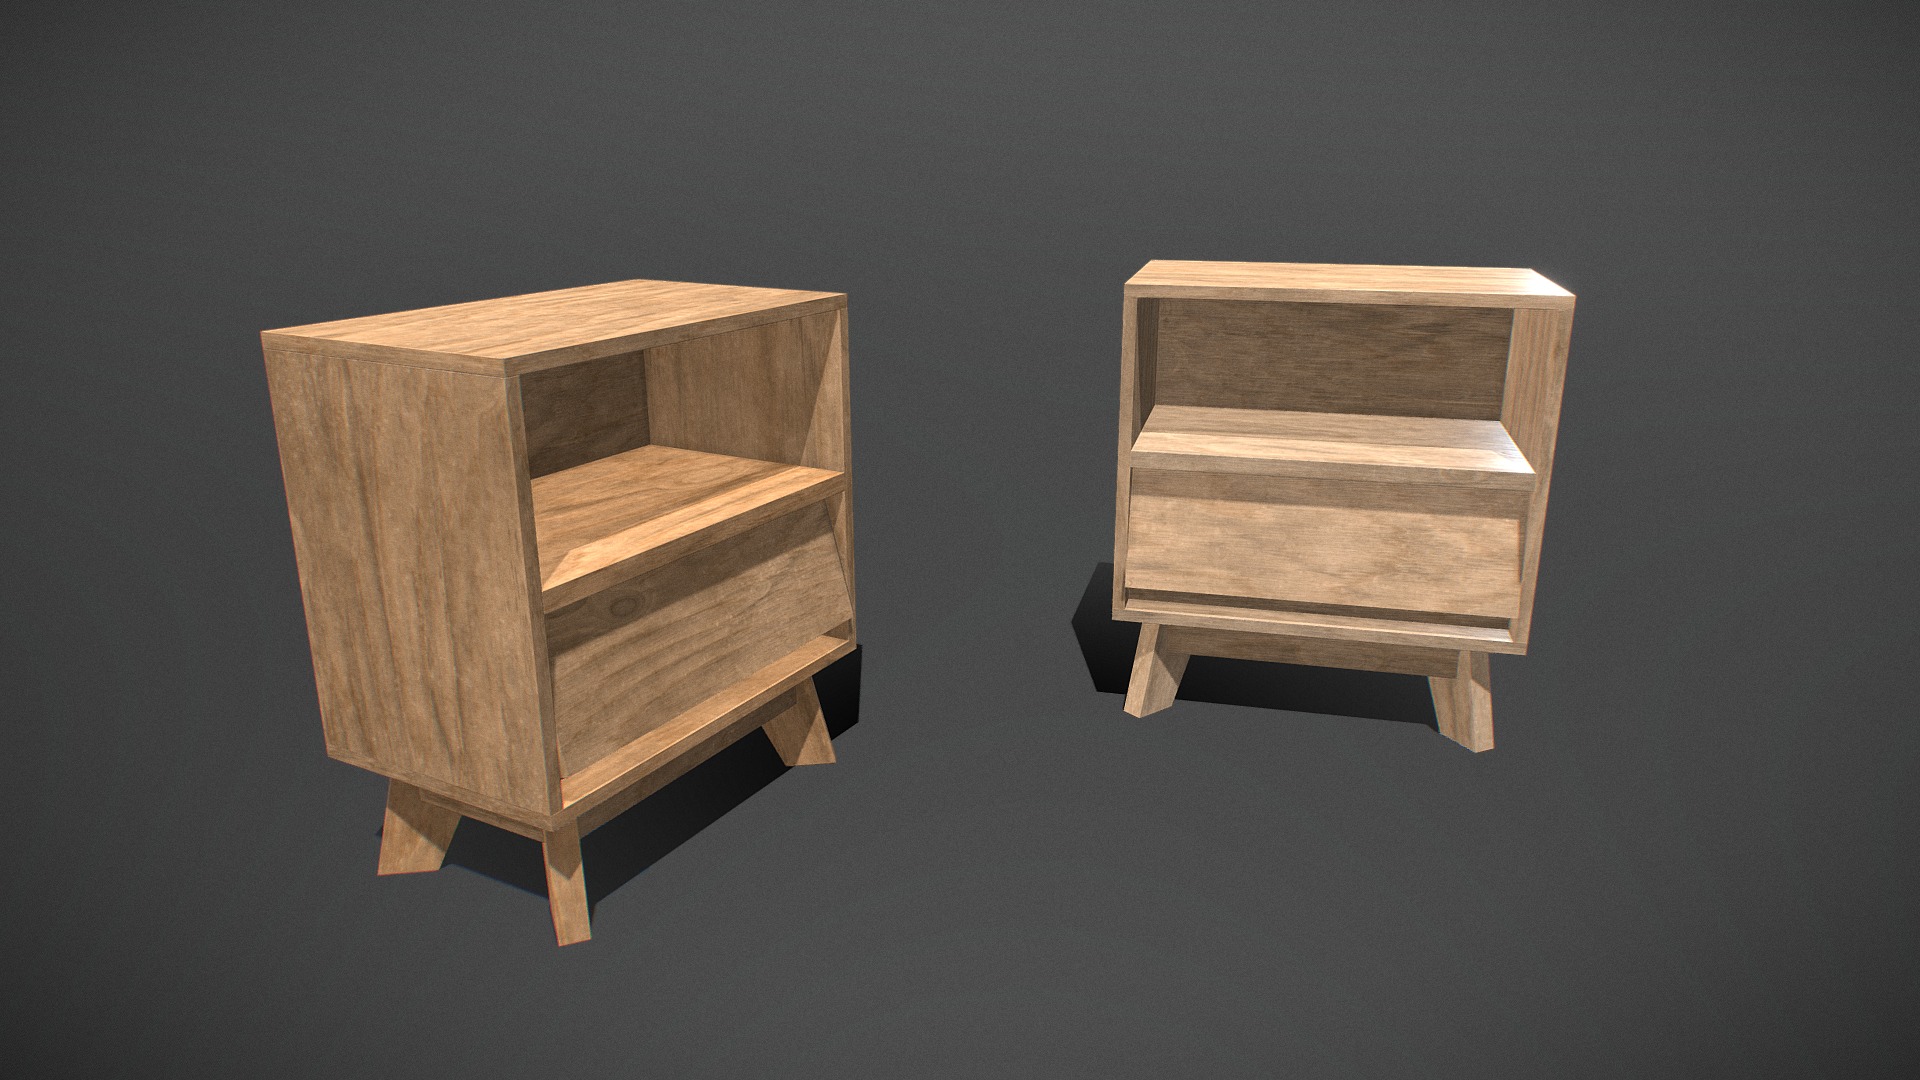 3D model Cabinets wooden - This is a 3D model of the Cabinets wooden. The 3D model is about two wooden chairs on a grey background.